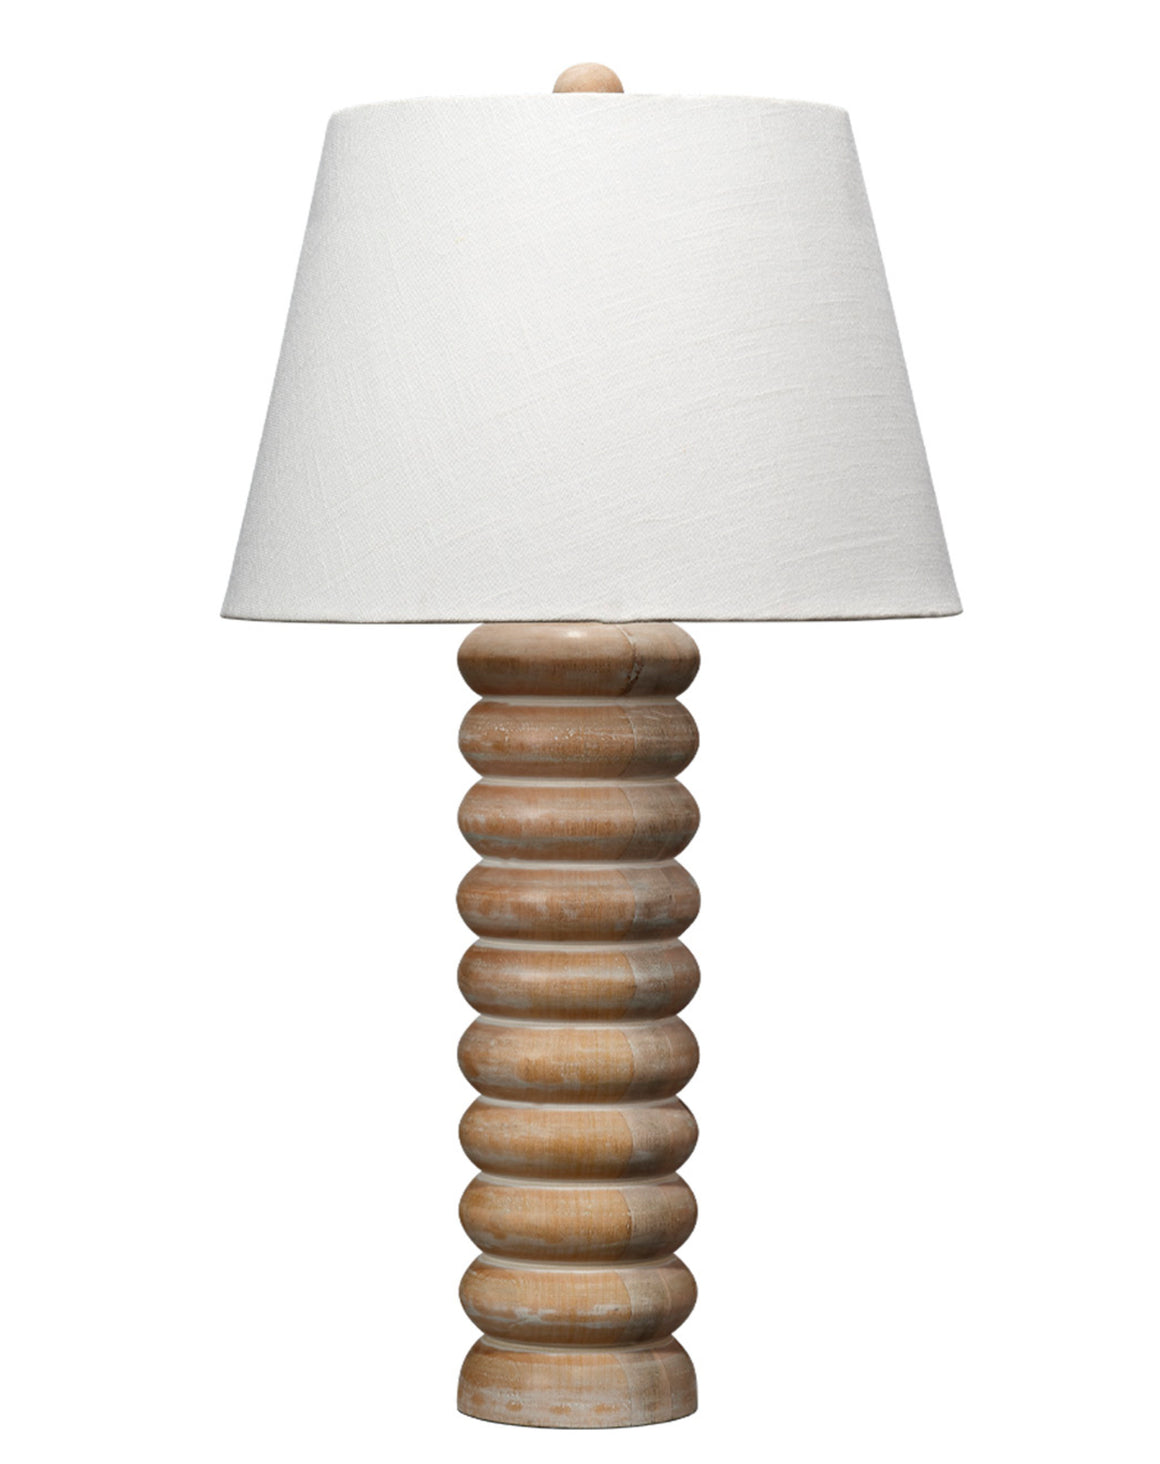 Abacus Table Lamp - Bleached Wood